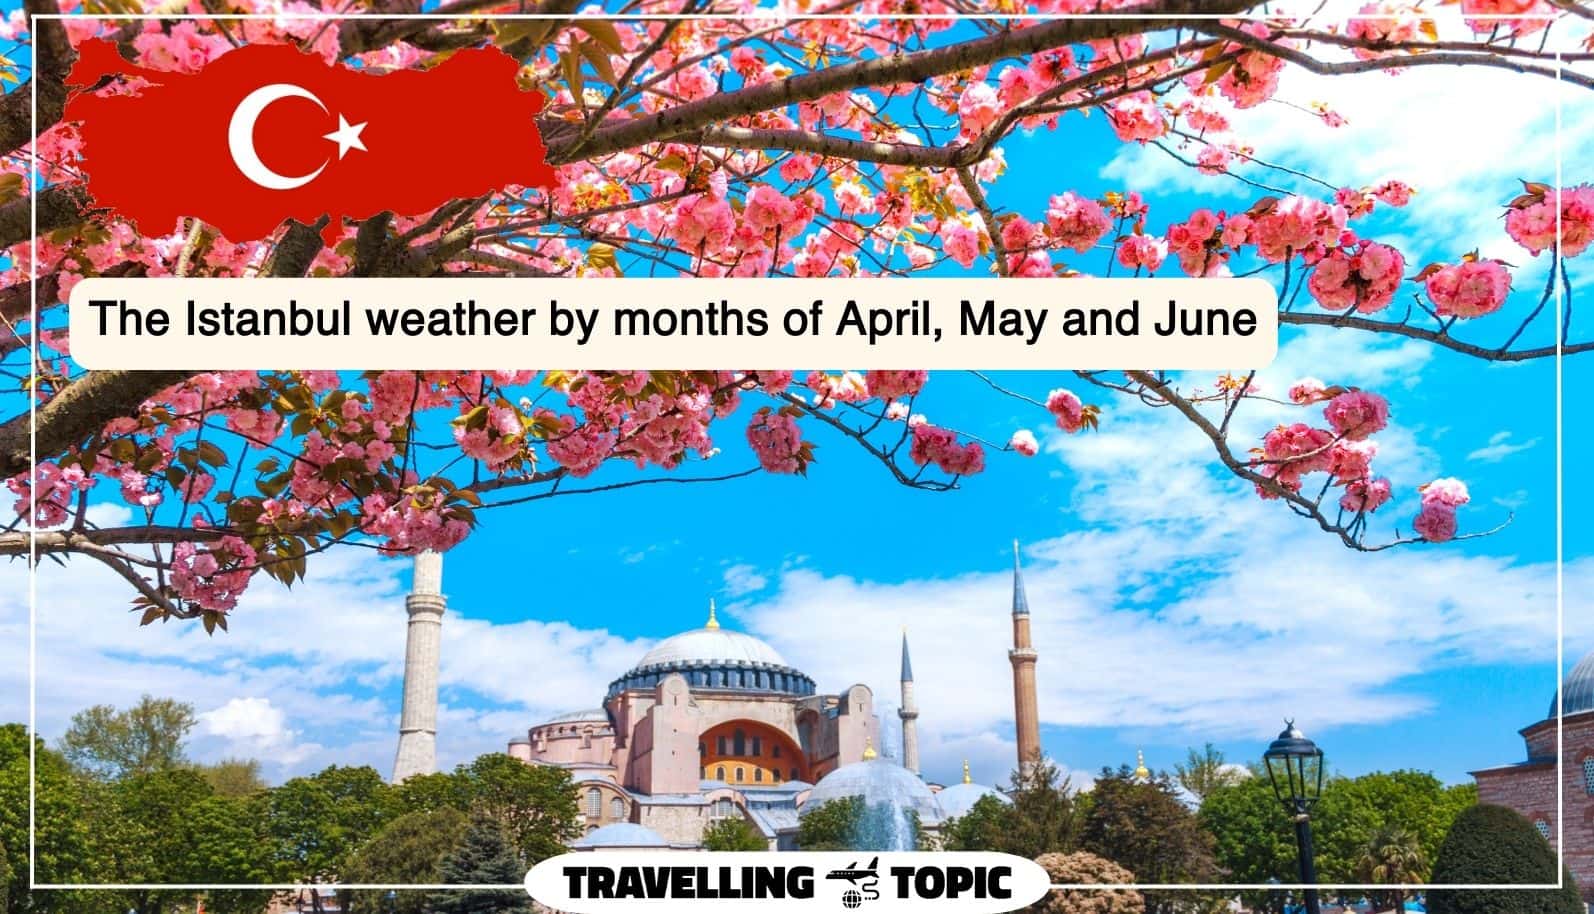 The Istanbul weather by months of April, May and June